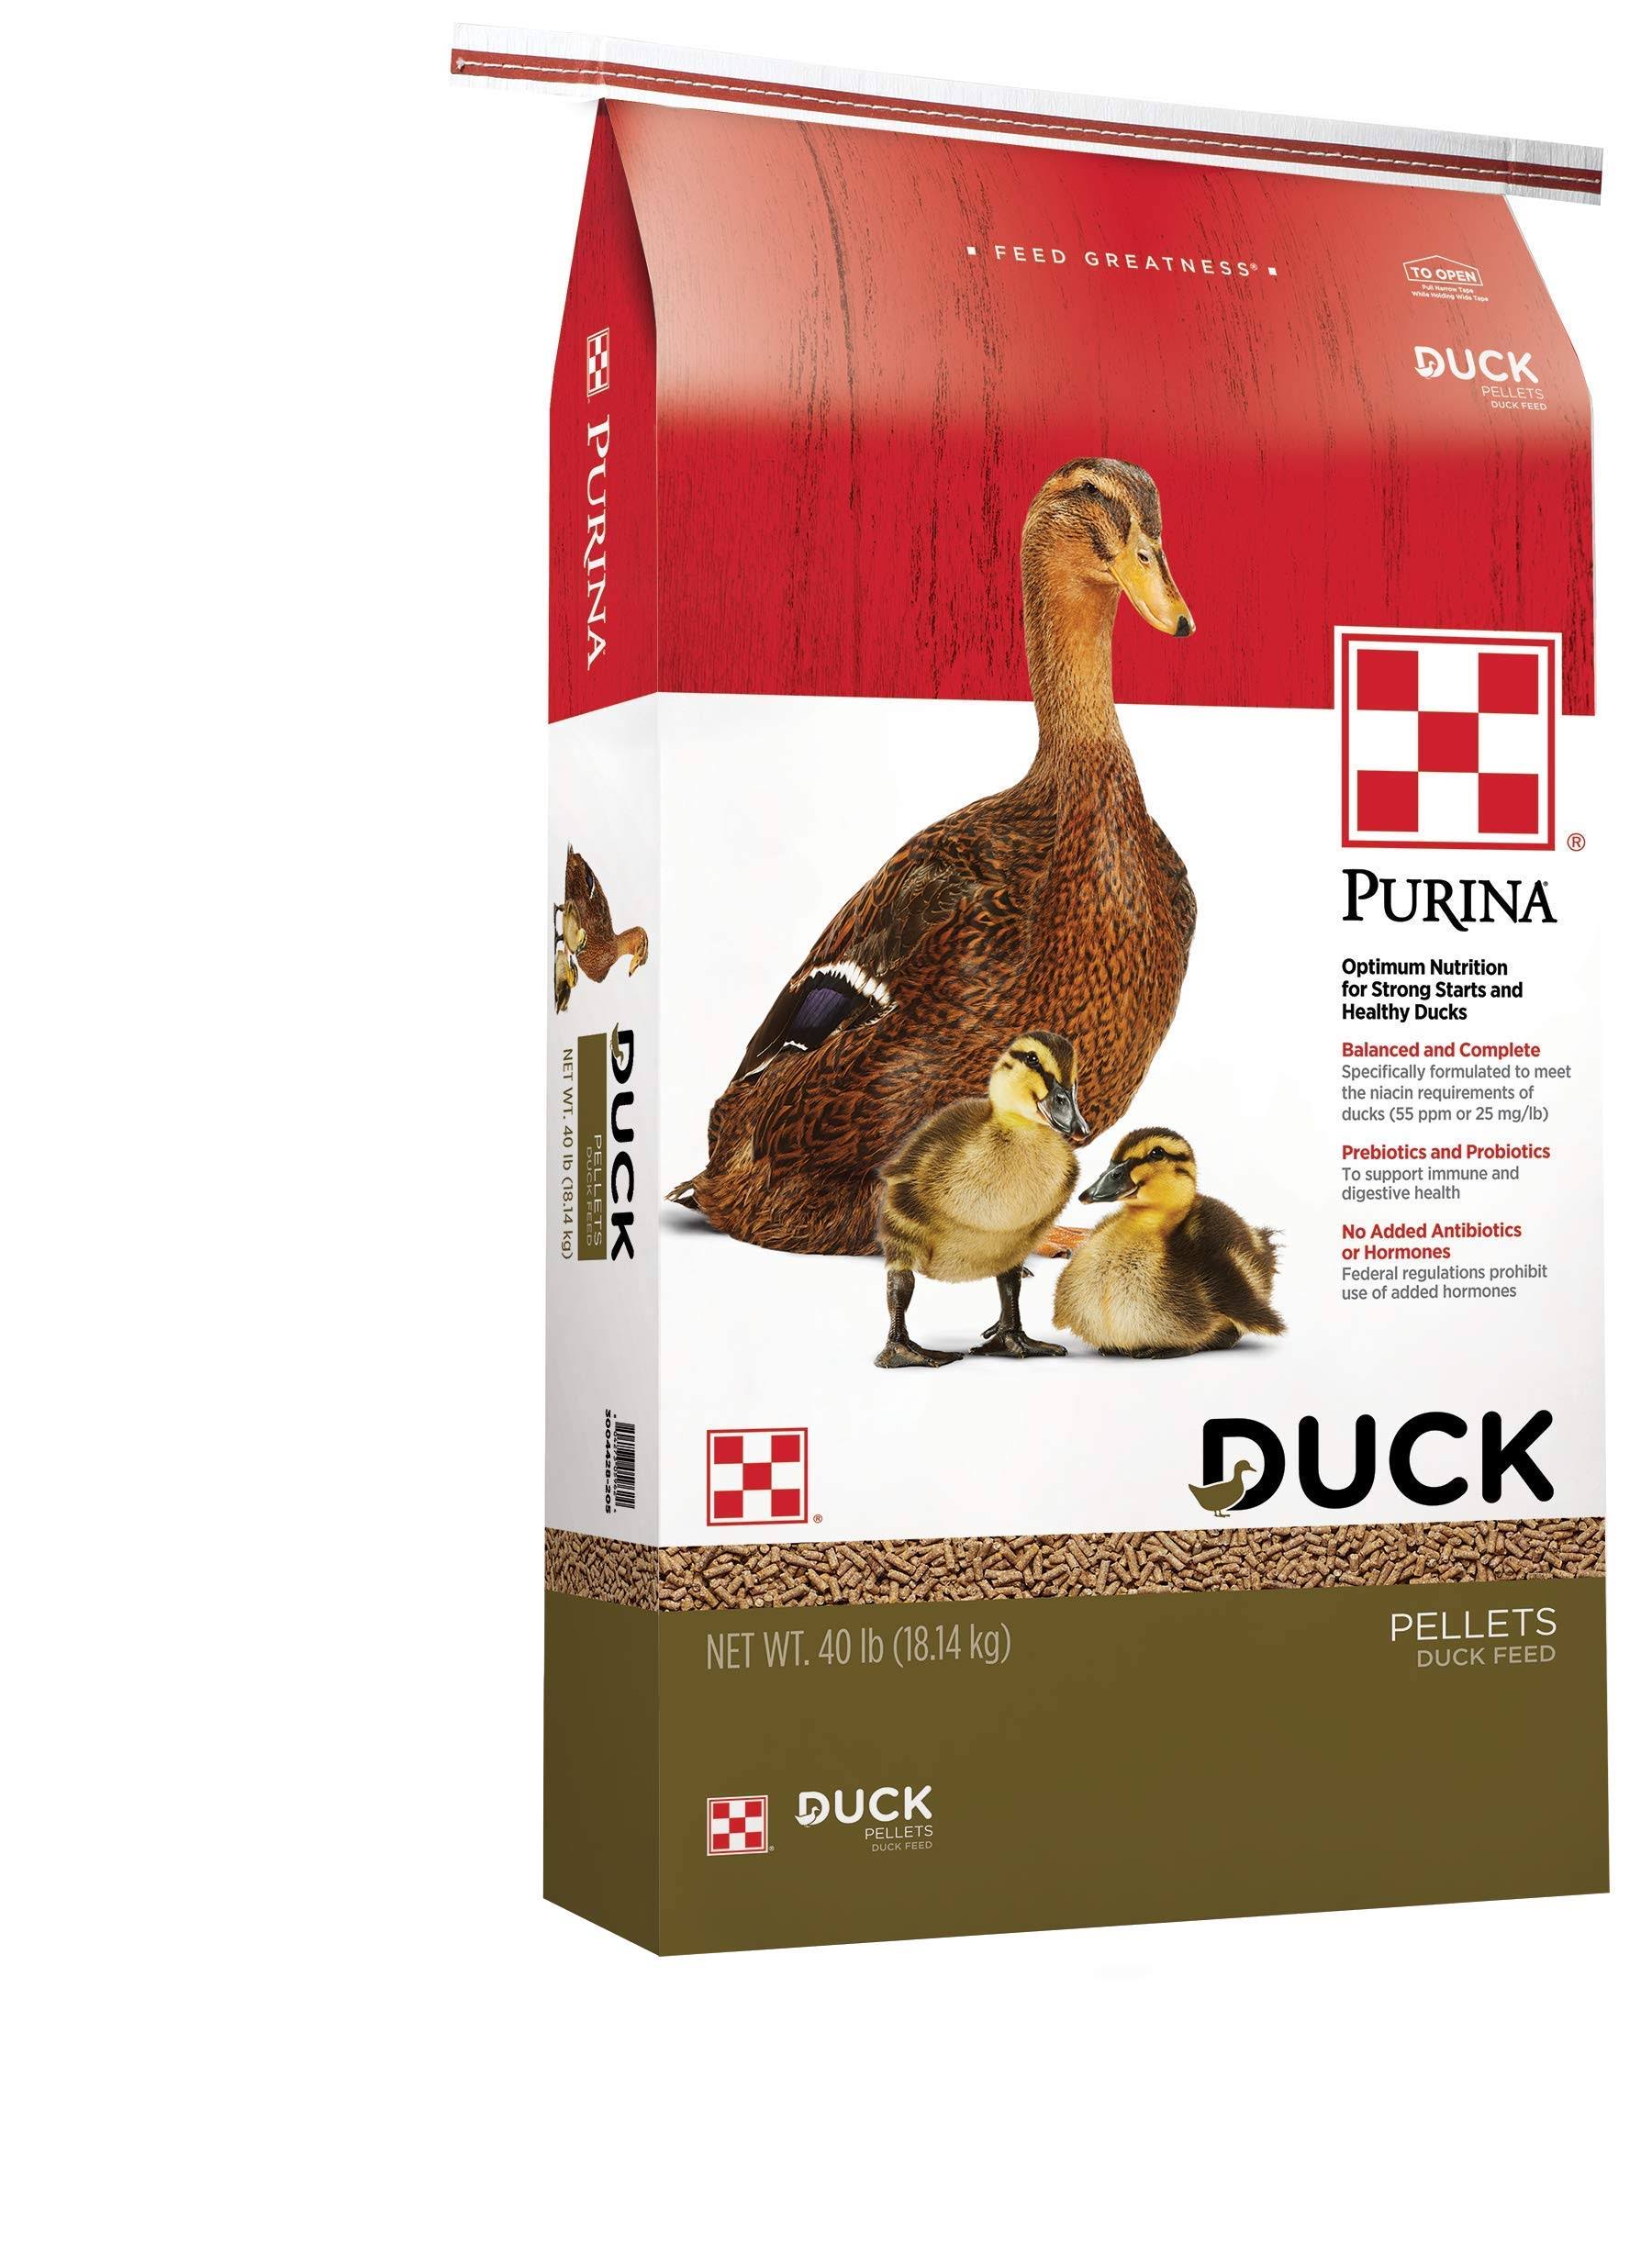 Purina 3004428-205 Livestock Food & Health Supplies 40 Pounds Pellet Duck Feed